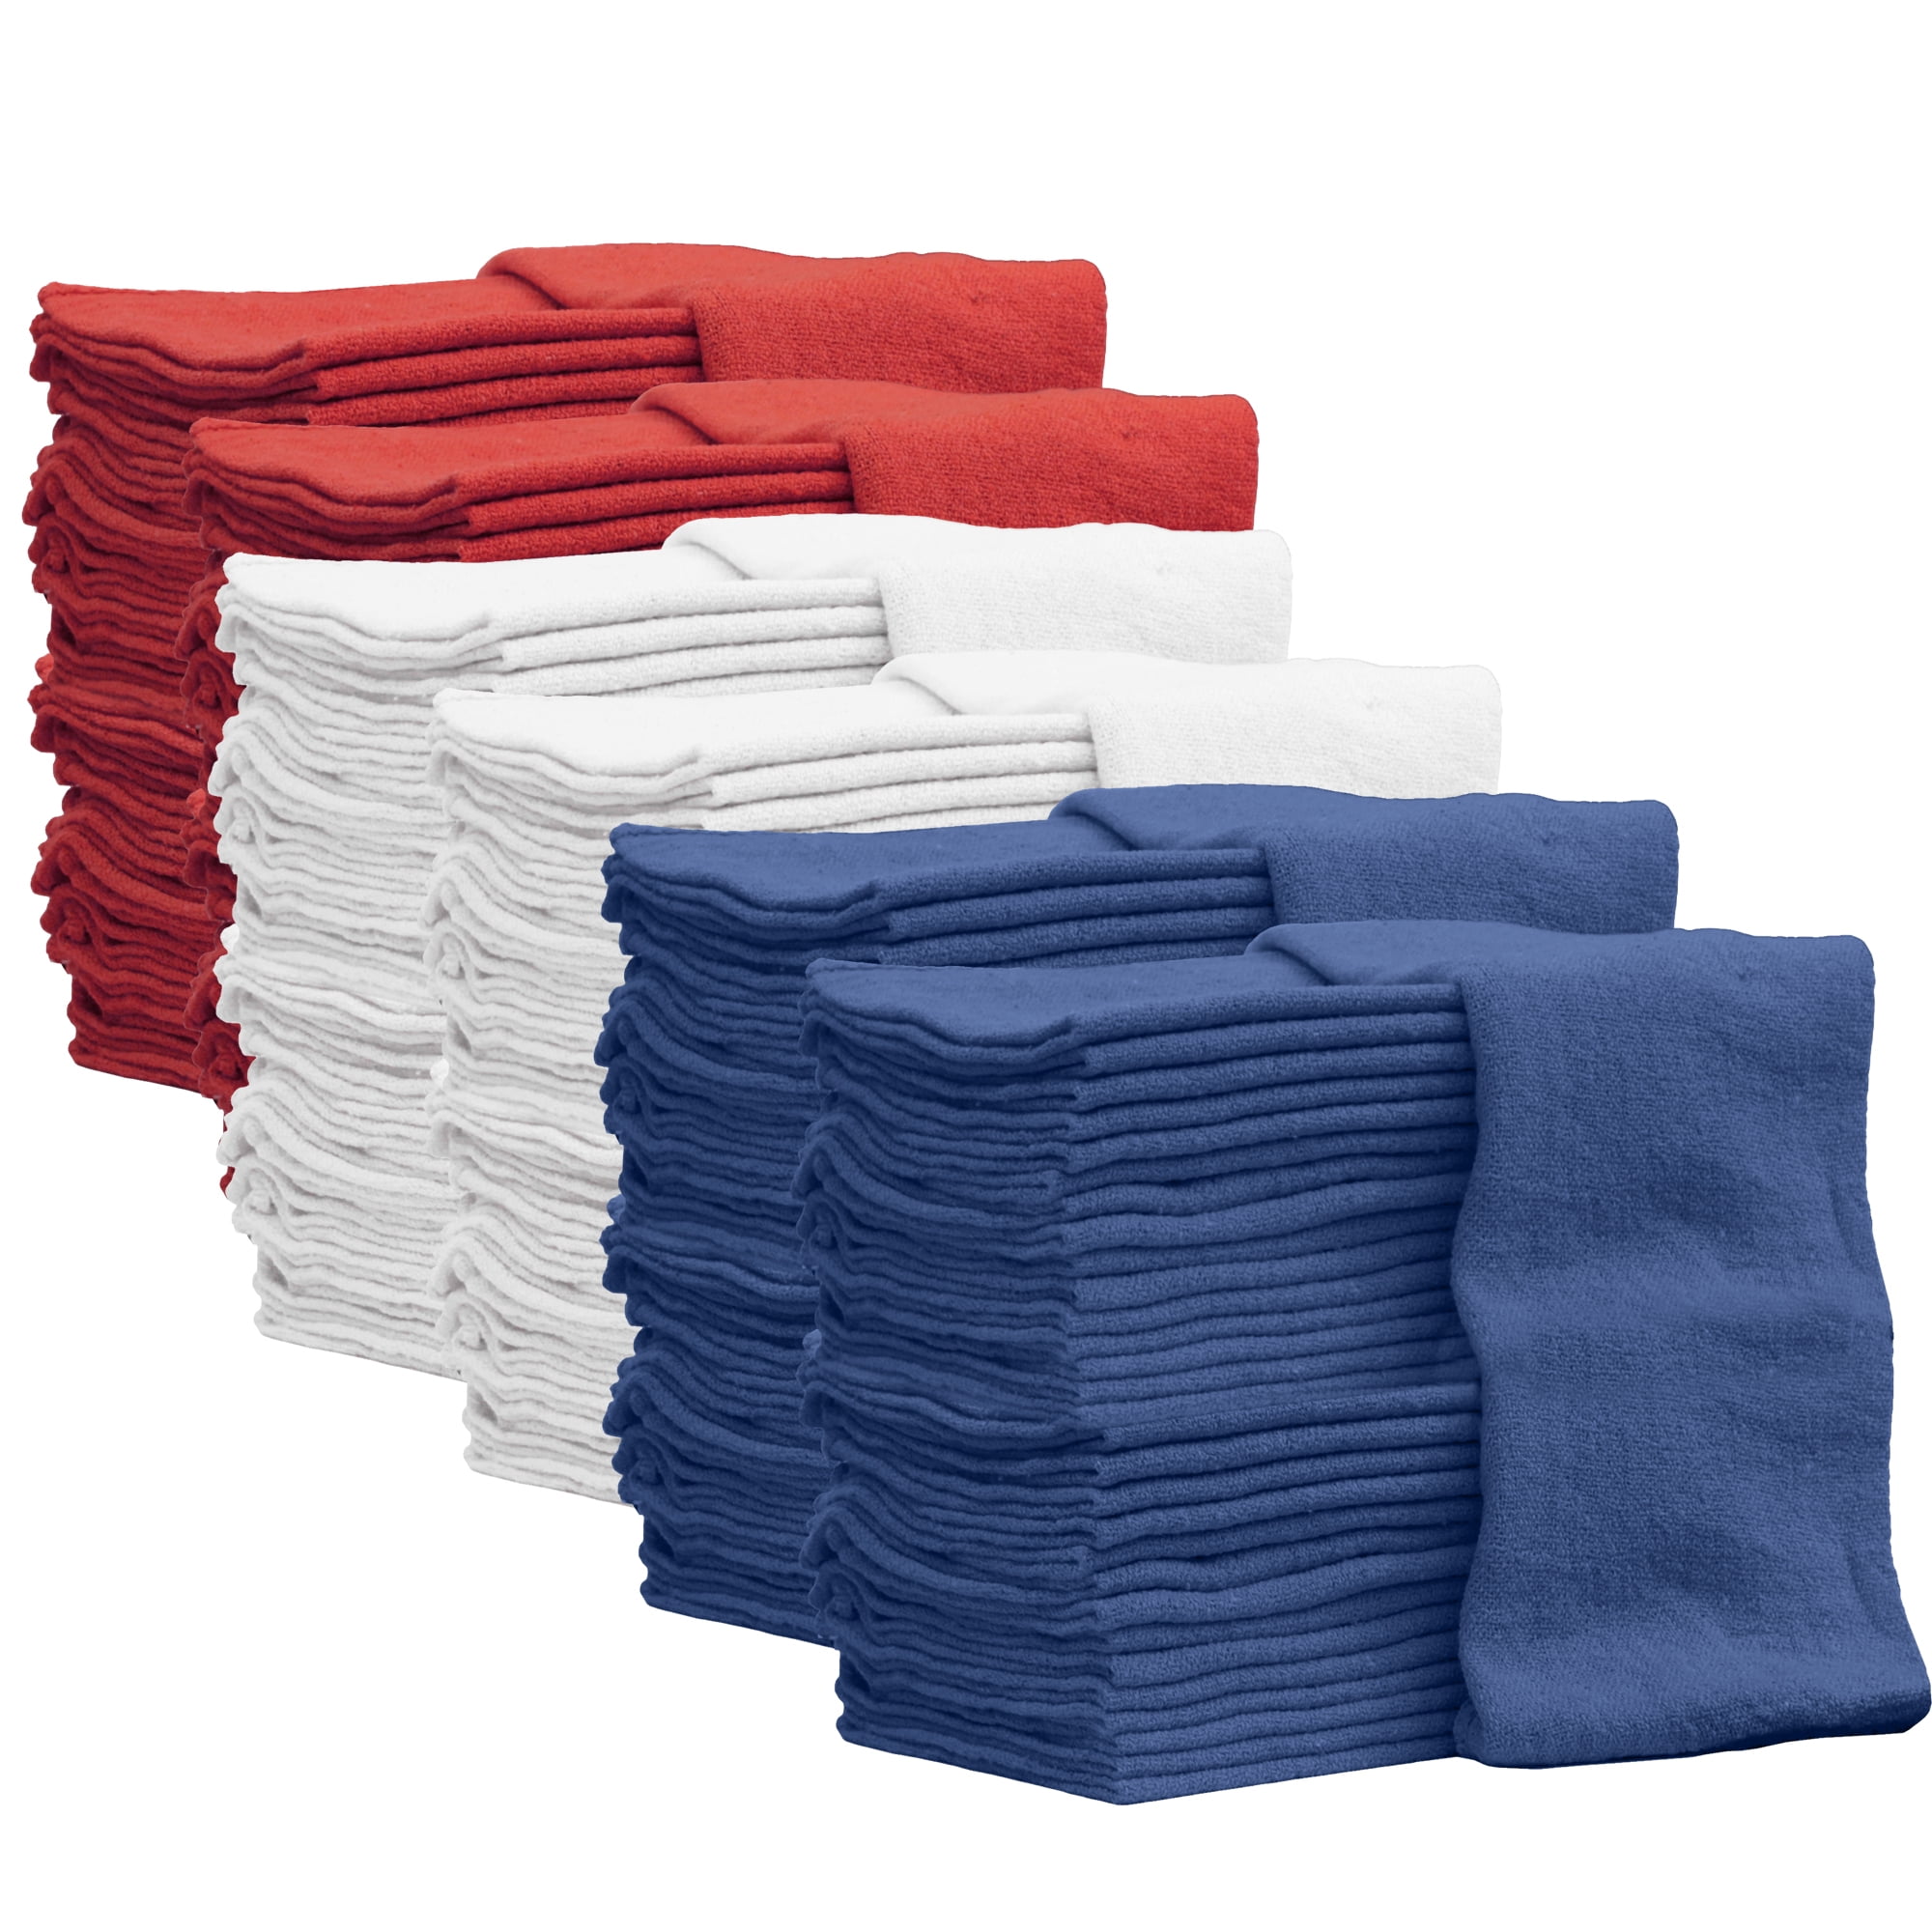 Oudain 50 Pcs Cotton Shop Towels Bulk 25.2 x 16.93 Inches, Absorbent Shop  Rags and Cleaning Towels Cleaning Car Rags for Towels Shops Bars Hotel